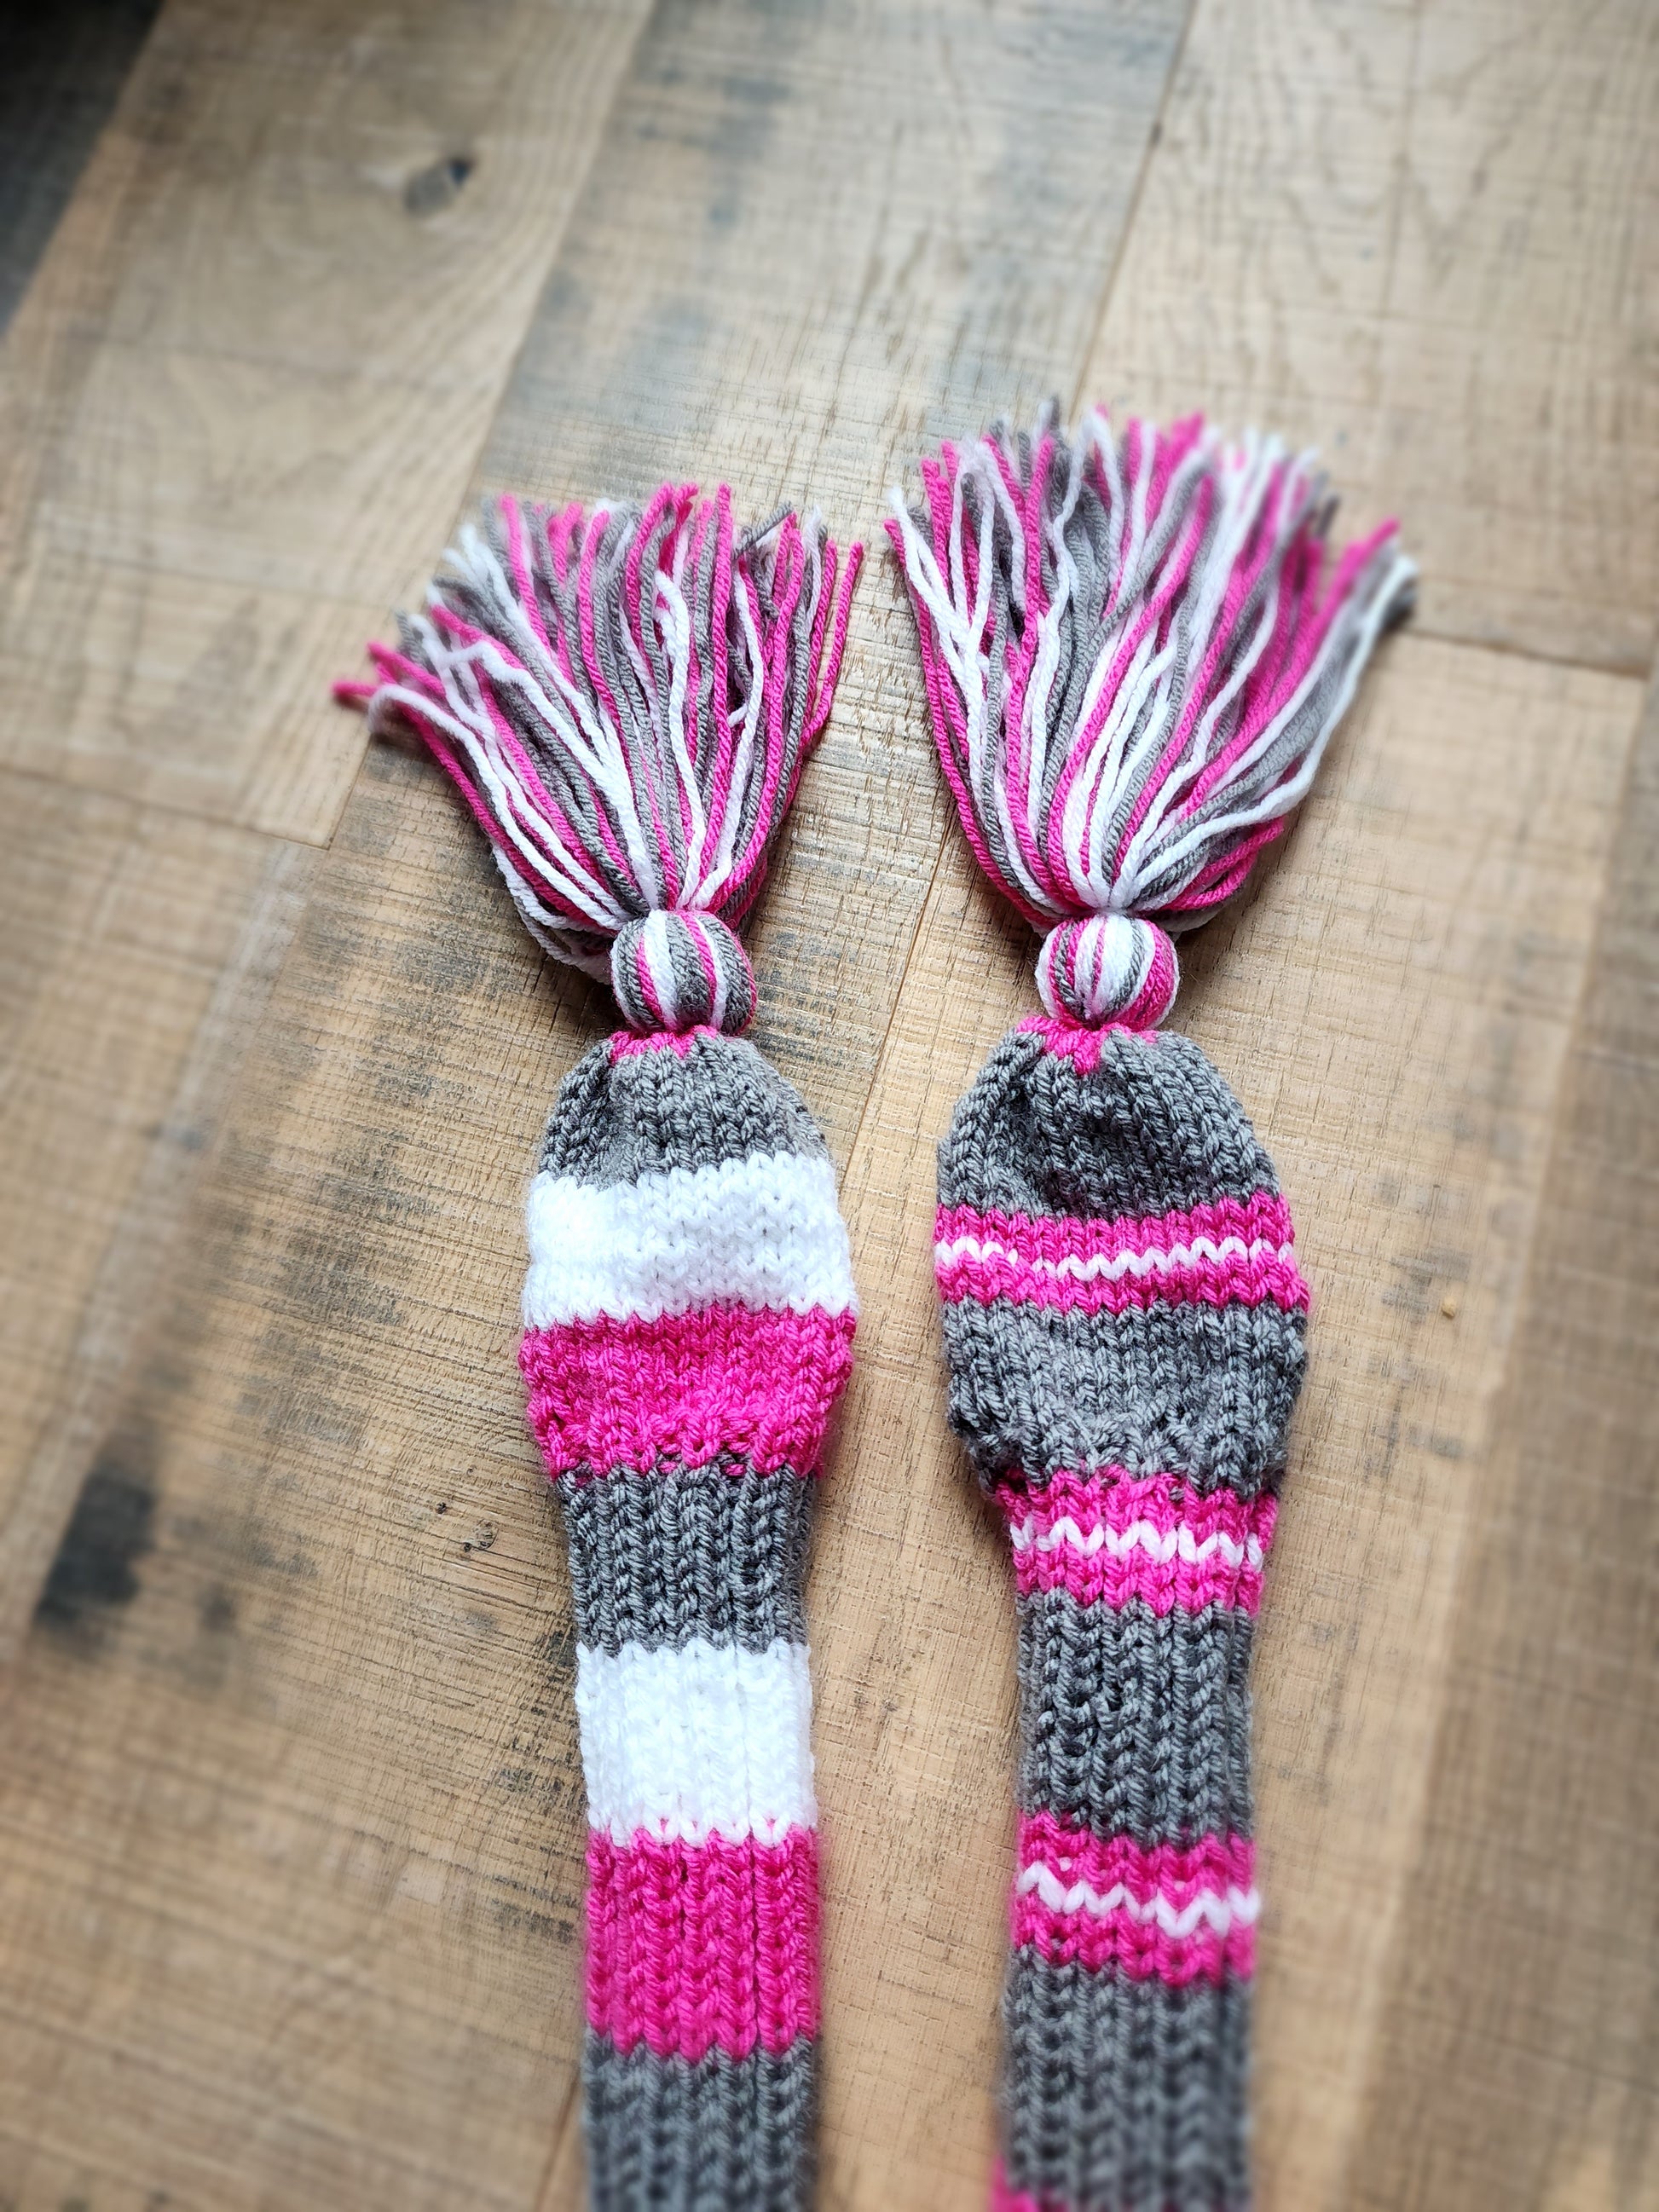 Two Golf Club Head Covers Retro-Vintage Pink, Gray & White with Tassels for Fairway Wood & Driver - Austinknittylimits